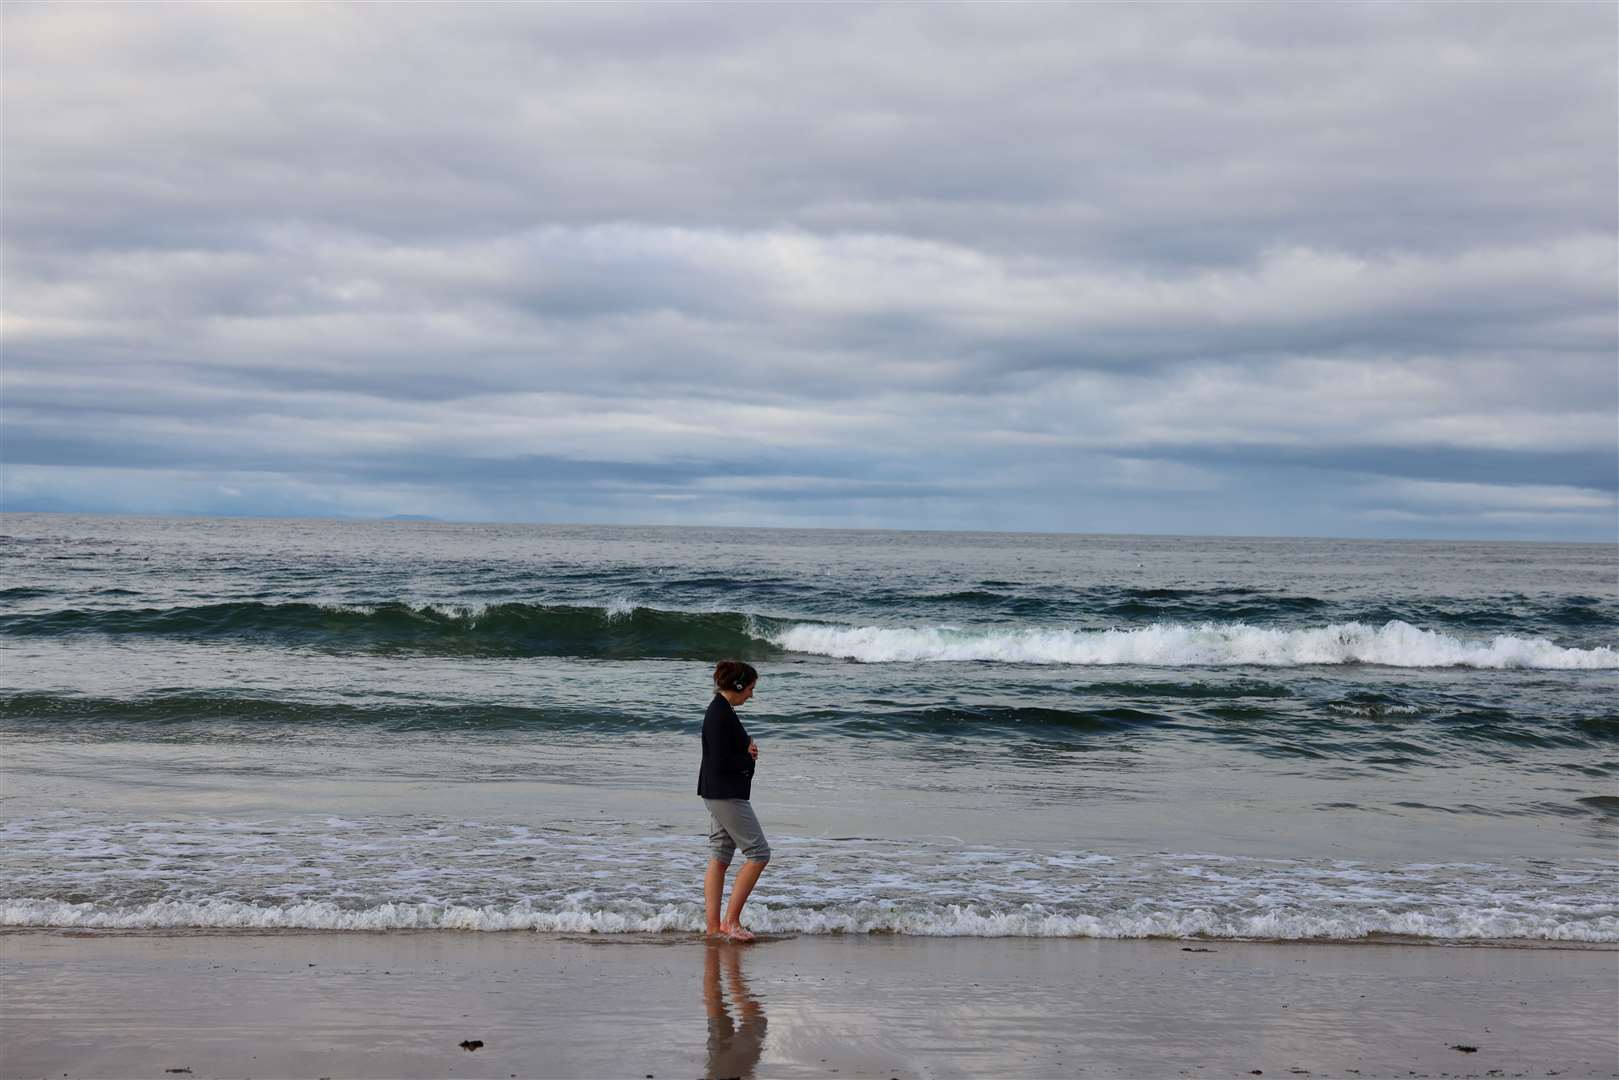 Alone with her thoughts at Hopeman beach.